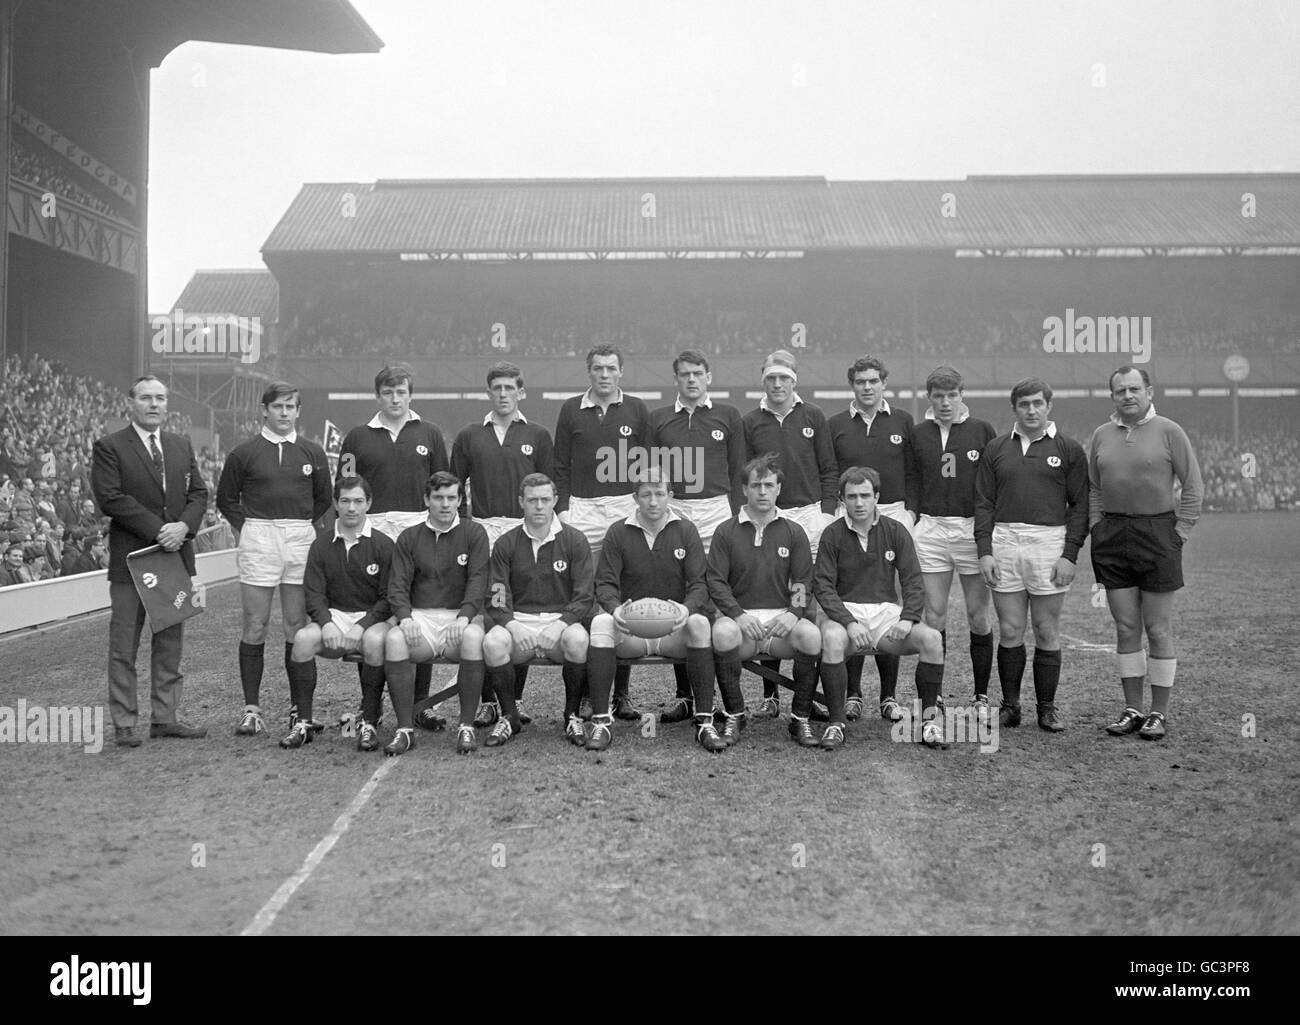 The Scotland team, standing left to right; DH Collier (touch judge); Gordon Connell; Sandy Carmichael; Wilson Lauder; Alistair McHarg; Peter Brown; Rodger Arneil; John Frame; Billy Steele; Ian McLauchlan; M Charles Durand (referee). Sitting, left to right; Ian Robertson, Colin Blaikie; William Jackson; Jim Telfer; Frank Laidlaw and Colin Telfer. Stock Photo